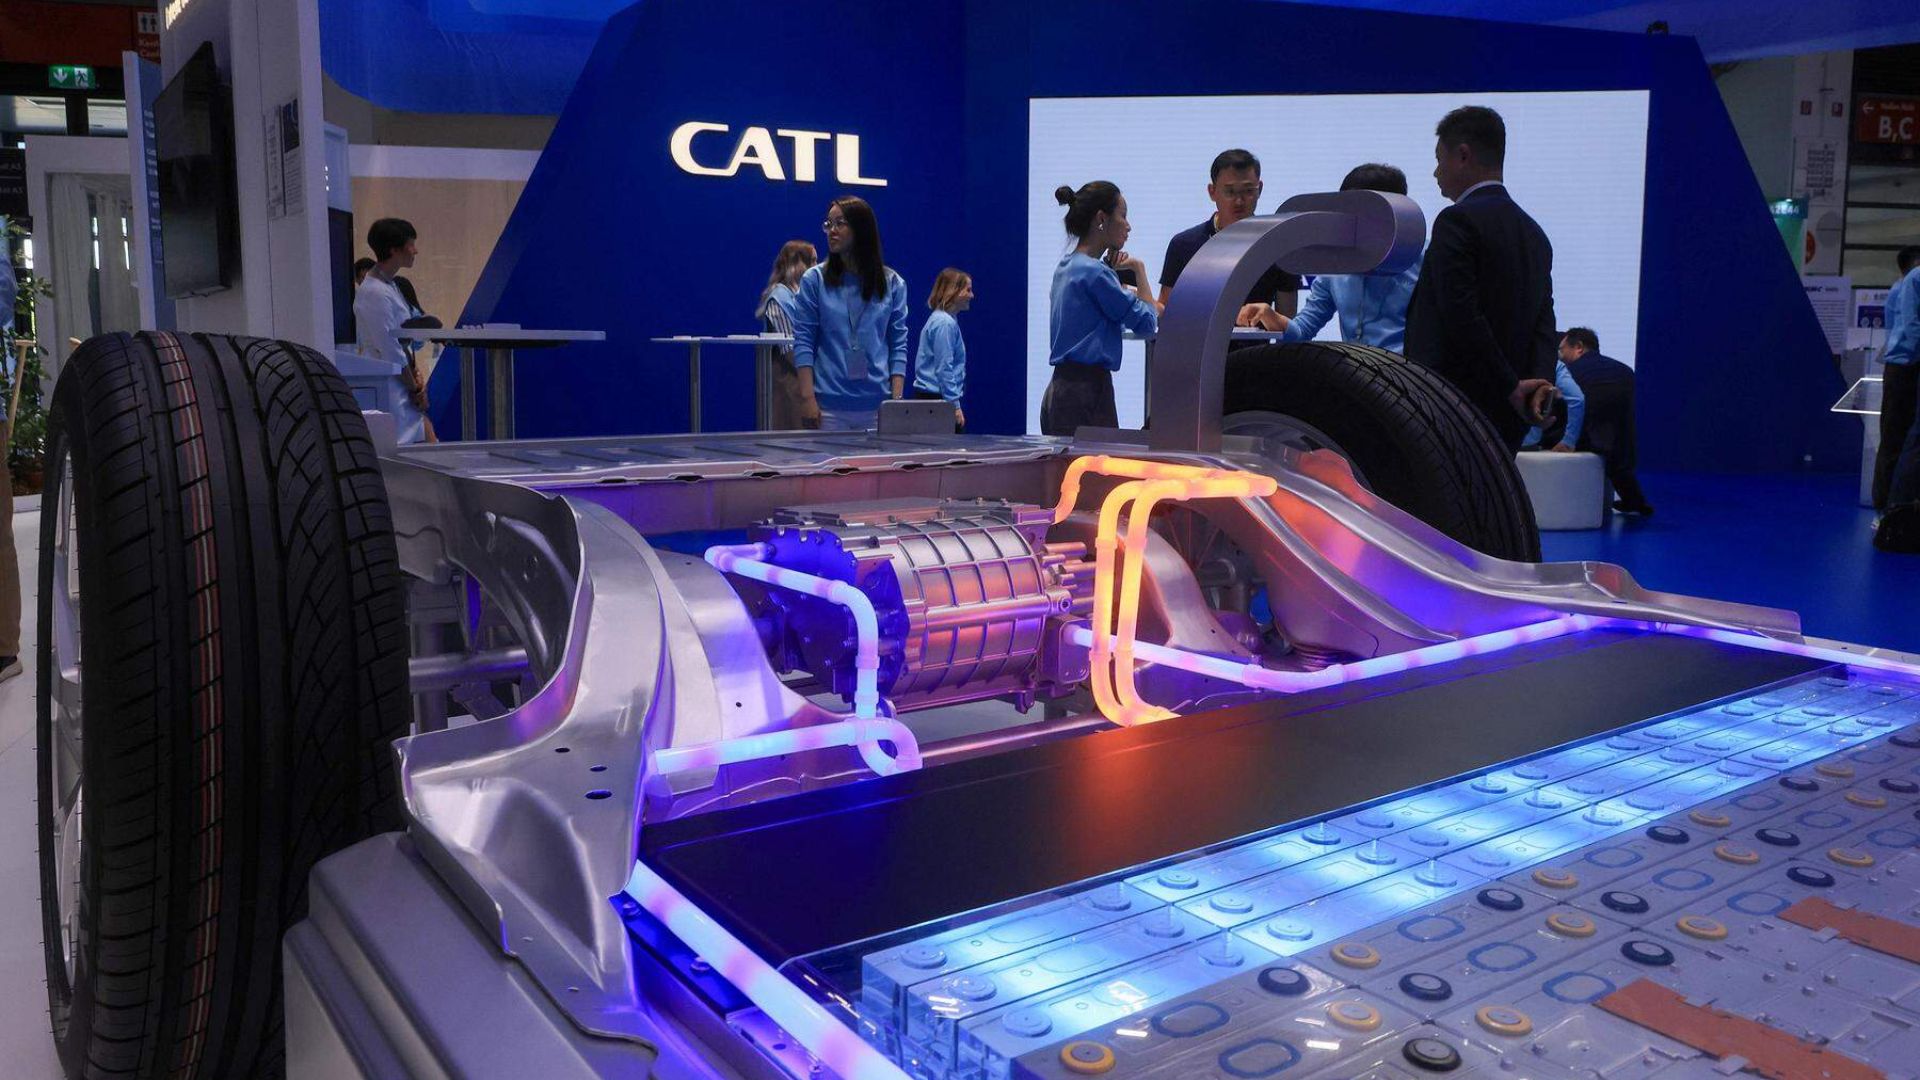 CATL’s new LFP battery promises 600-kms range in 10-min charge [Video]